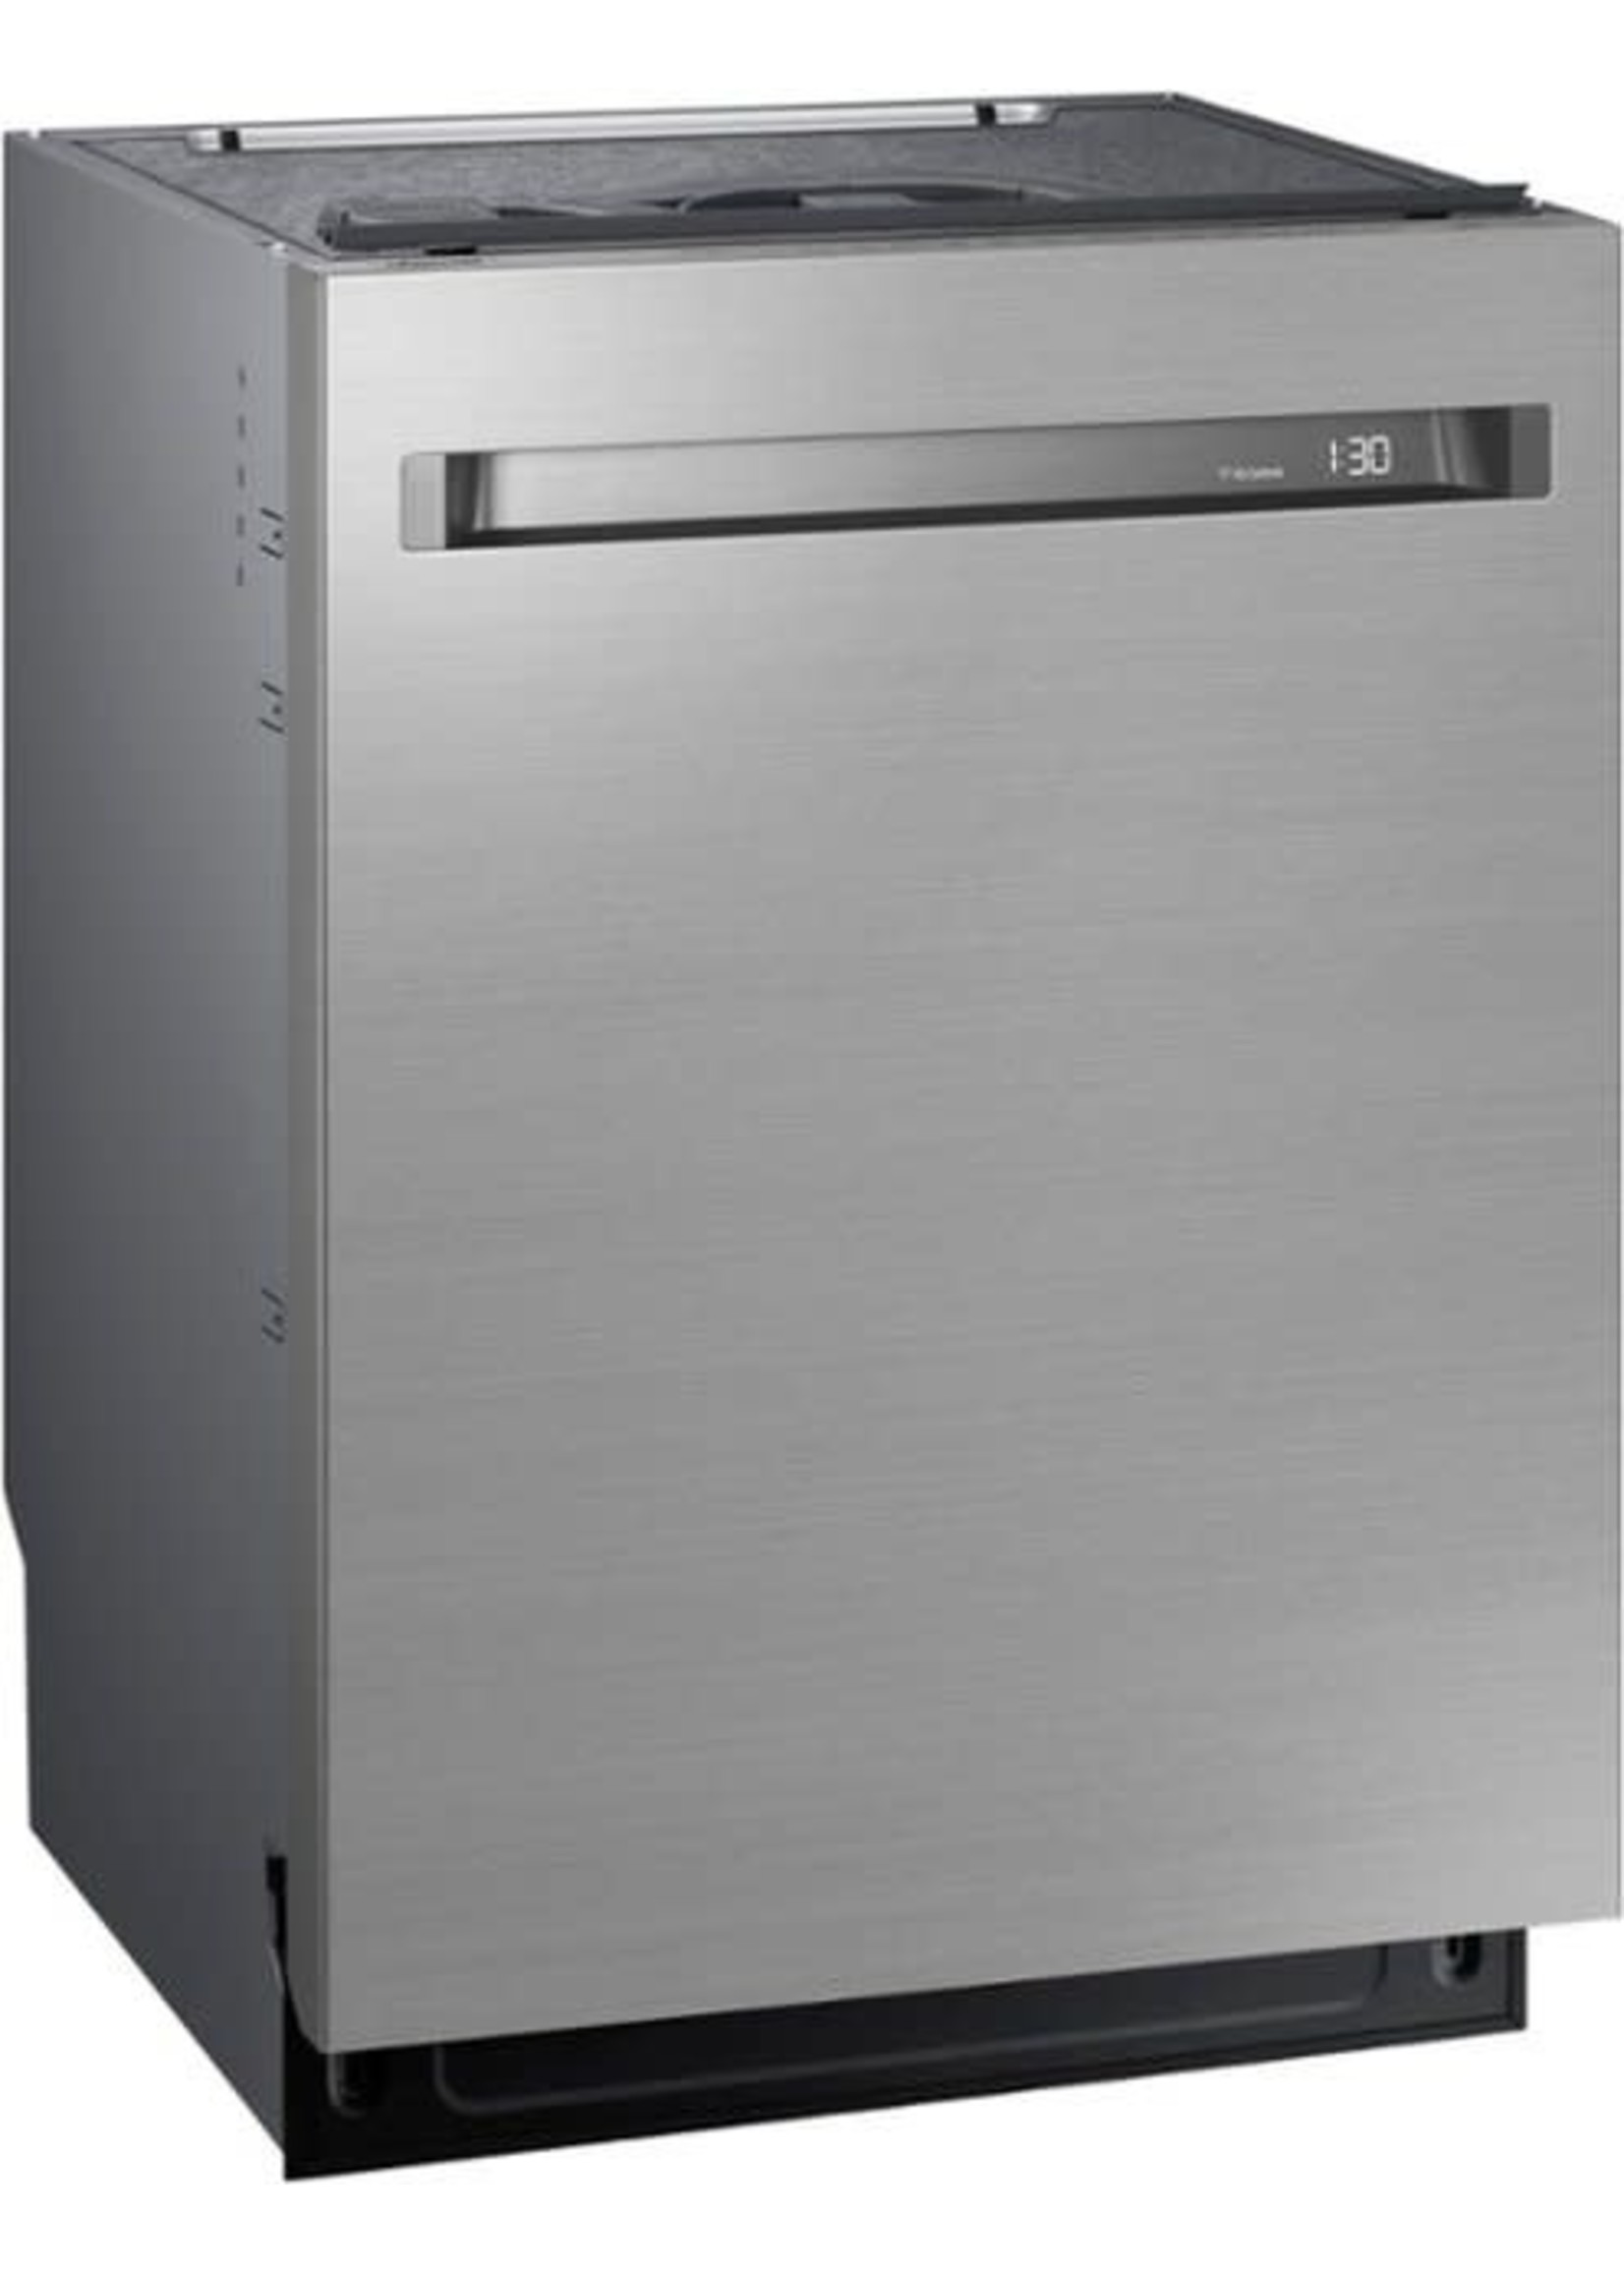 DACOR Dacor Contemporary 24-Inch Fully Integrated Dishwasher